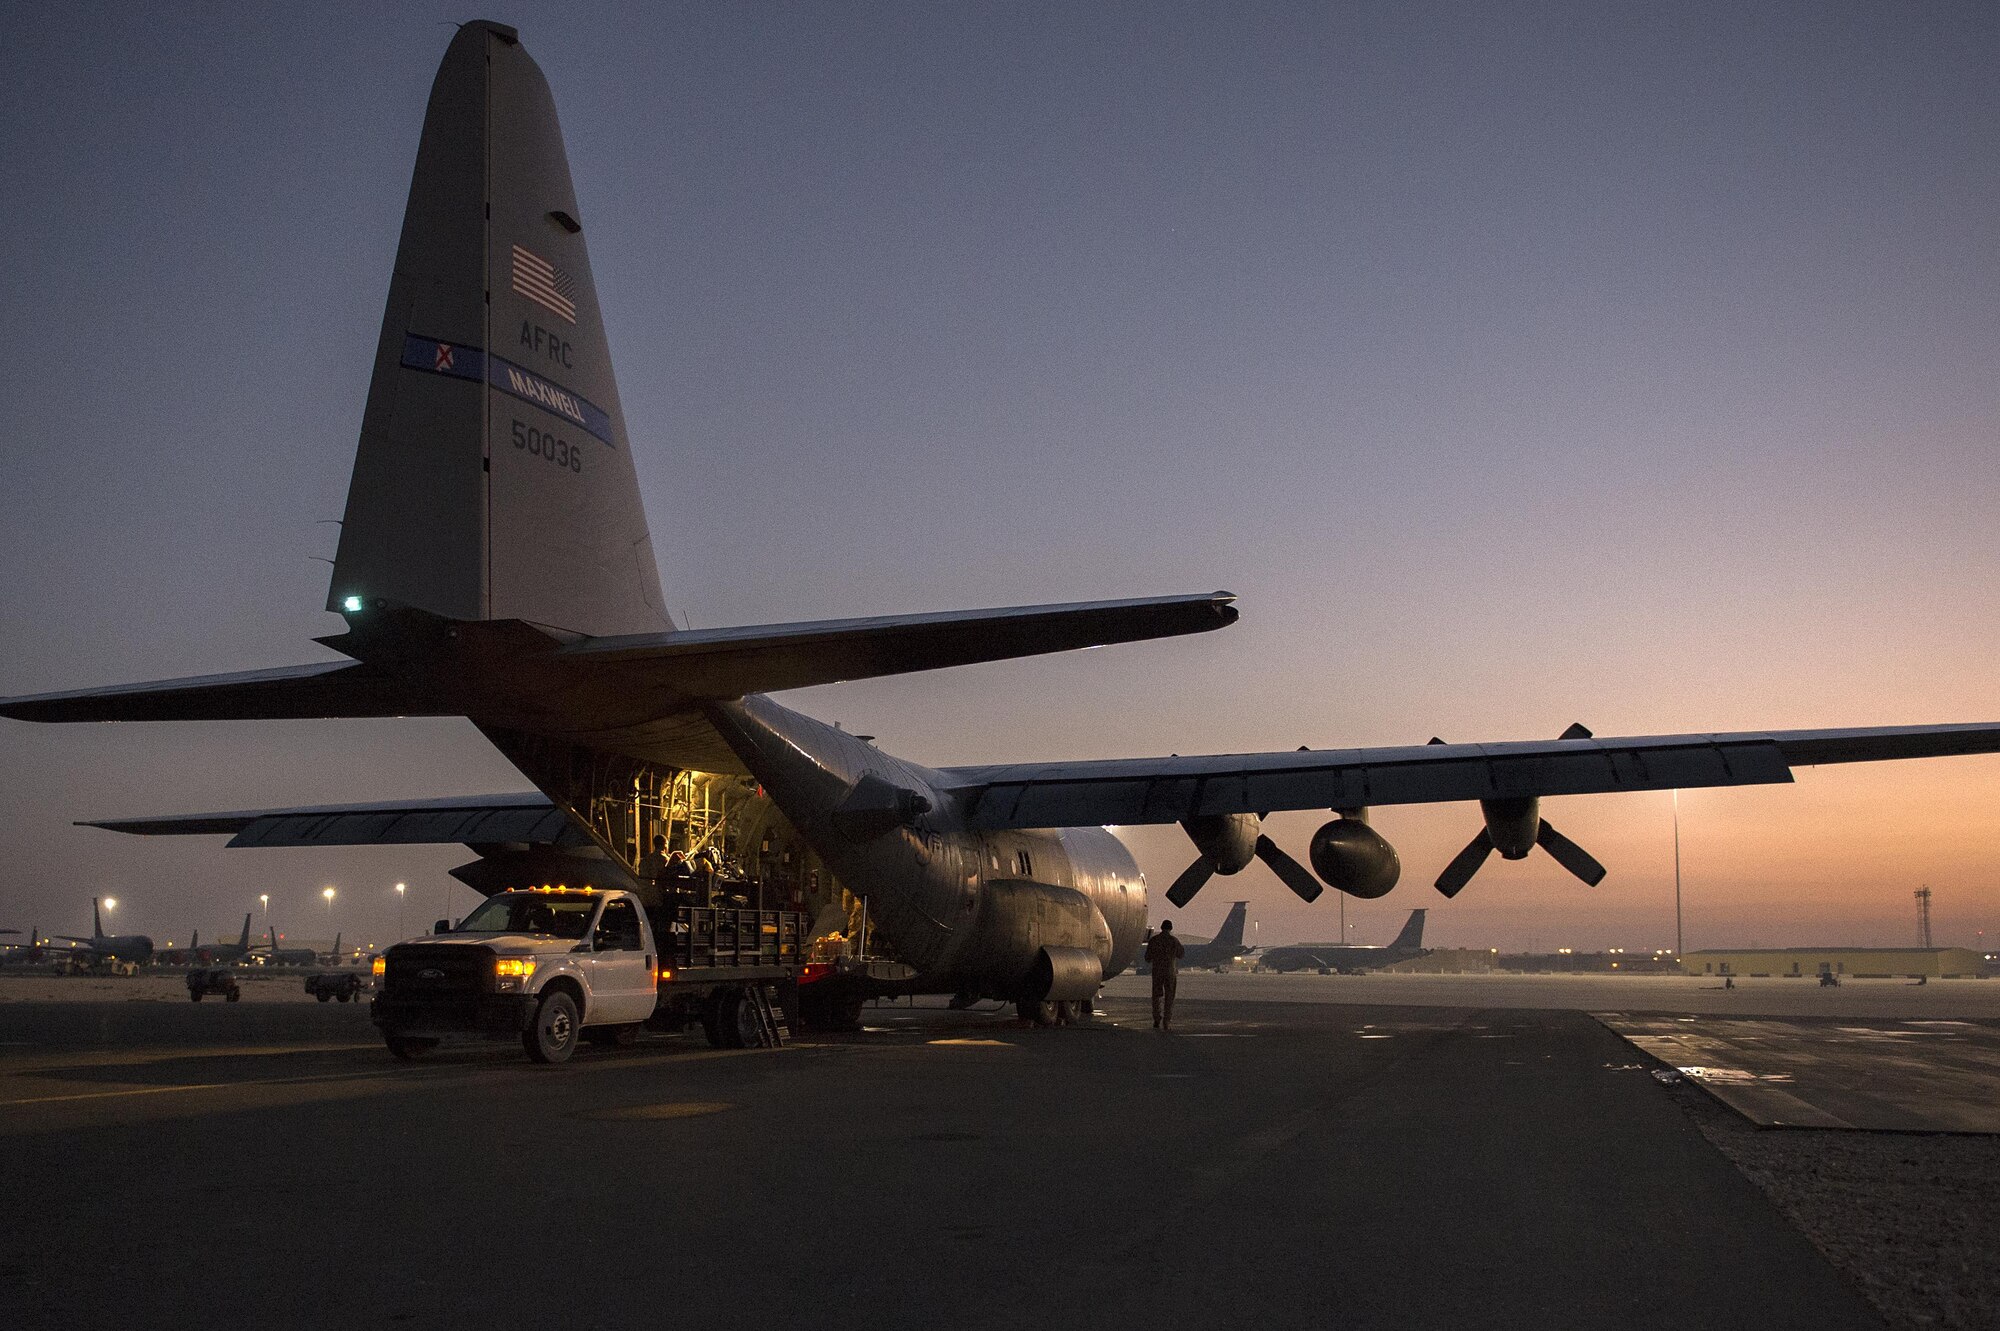 U.S. Air Force Airmen from the 379th Expeditionary Aeromedical Evacuation Squadron load medical equipment onto a C-130H Hercules at Al Udeid Air Base, Qatar in support of Operation Inherent Resolve, Jan. 6, 2016. OIR is the coalition intervention against the Islamic State of Iraq and the Levant. (U.S. Air Force photo by Tech. Sgt. Nathan Lipscomb)